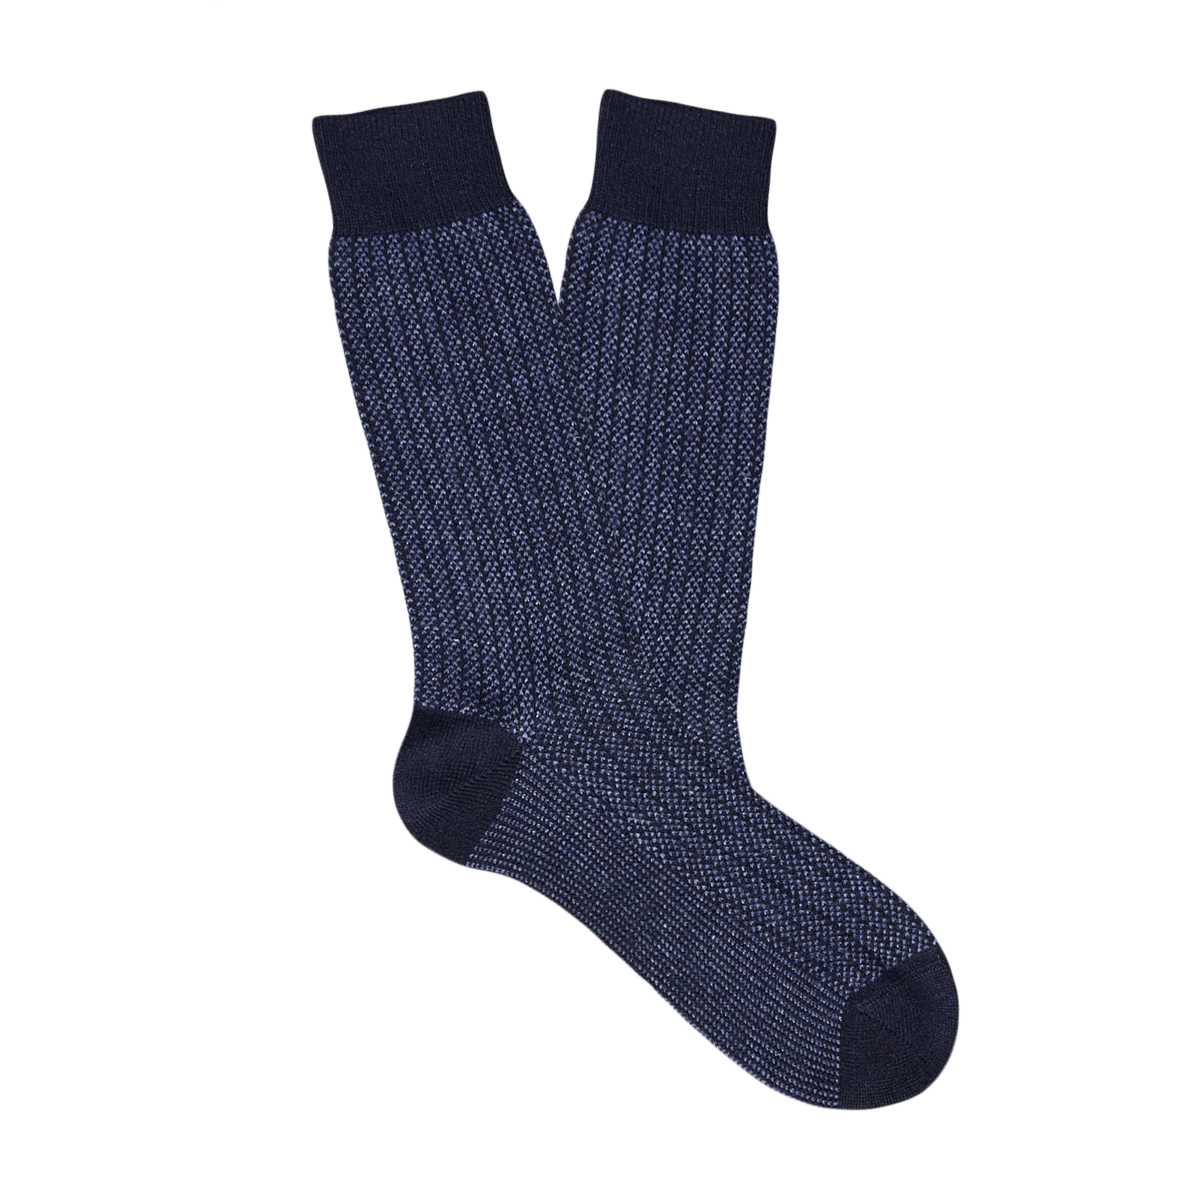 A pair of Navy Blue Structured Cashmere Socks by Bresciani on a white background.